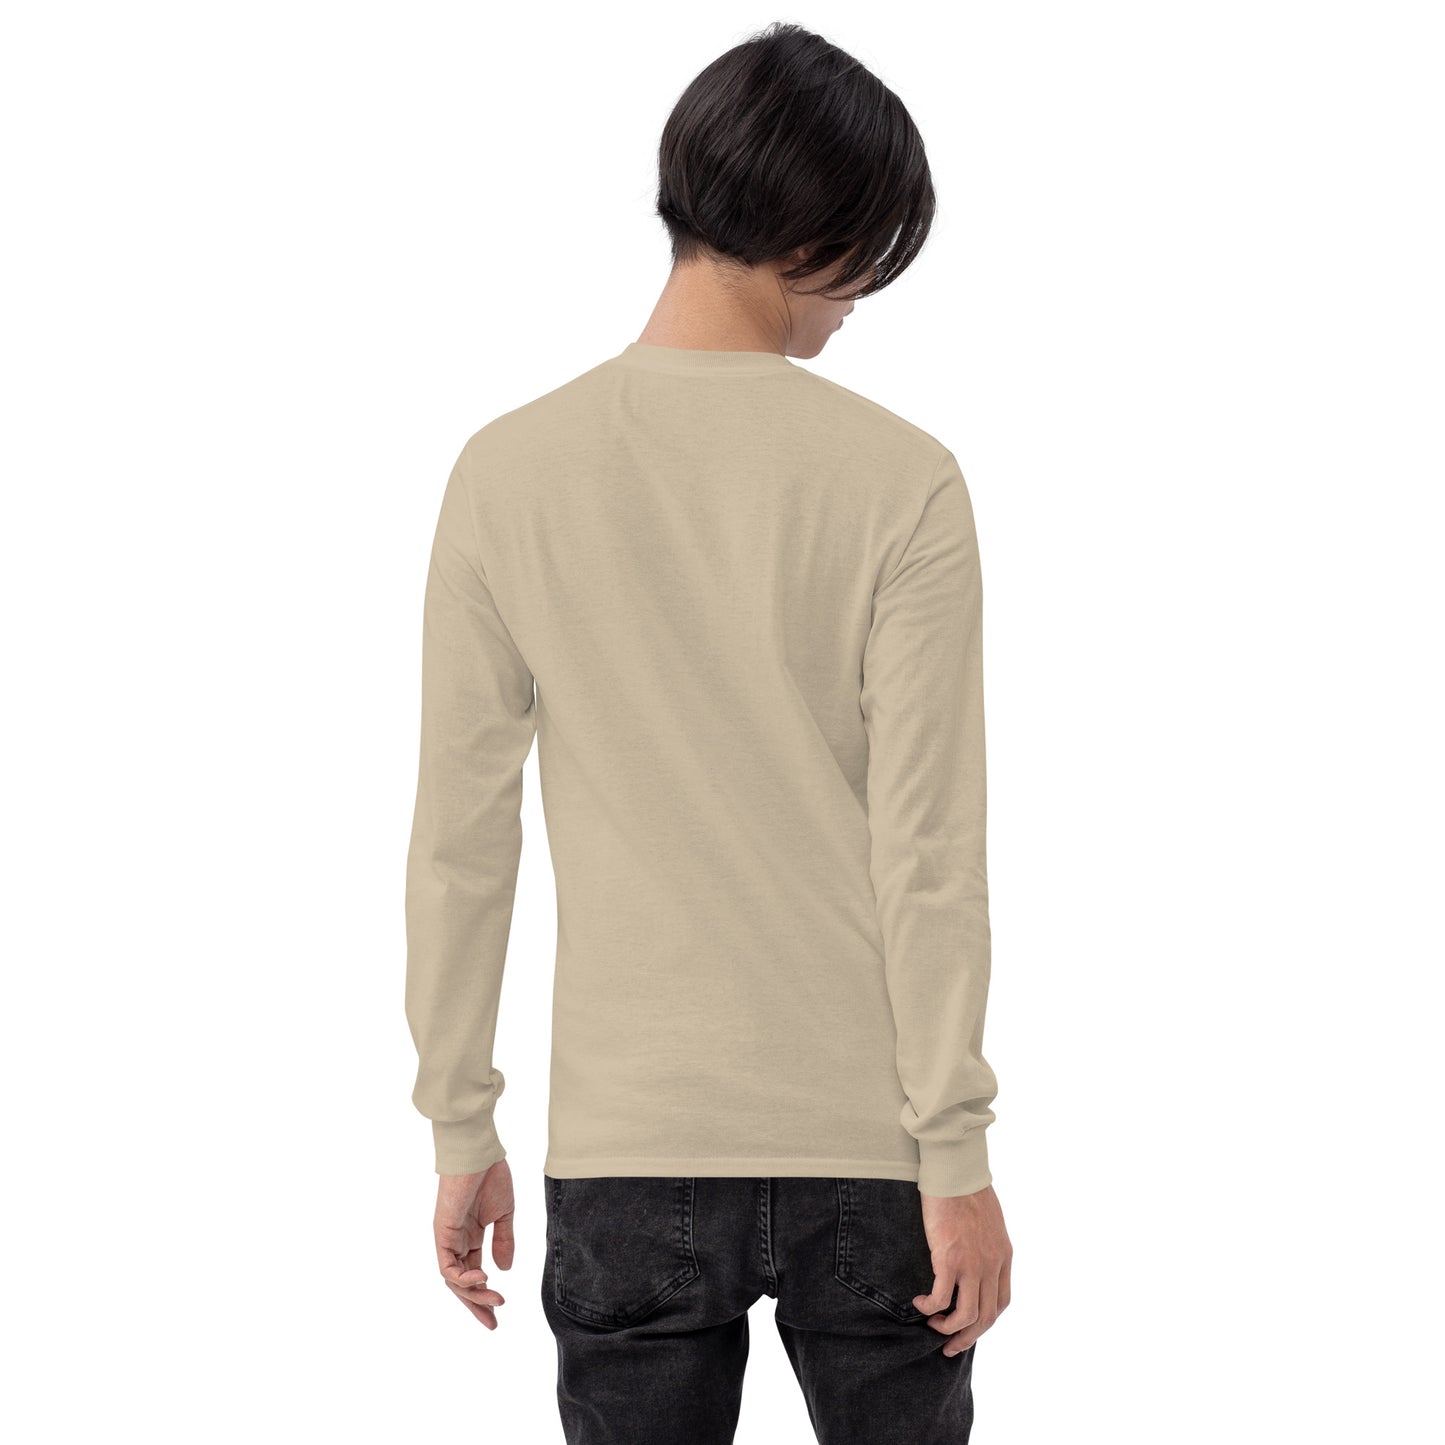 Boxed Smile Tee in Sand - Long Sleeve